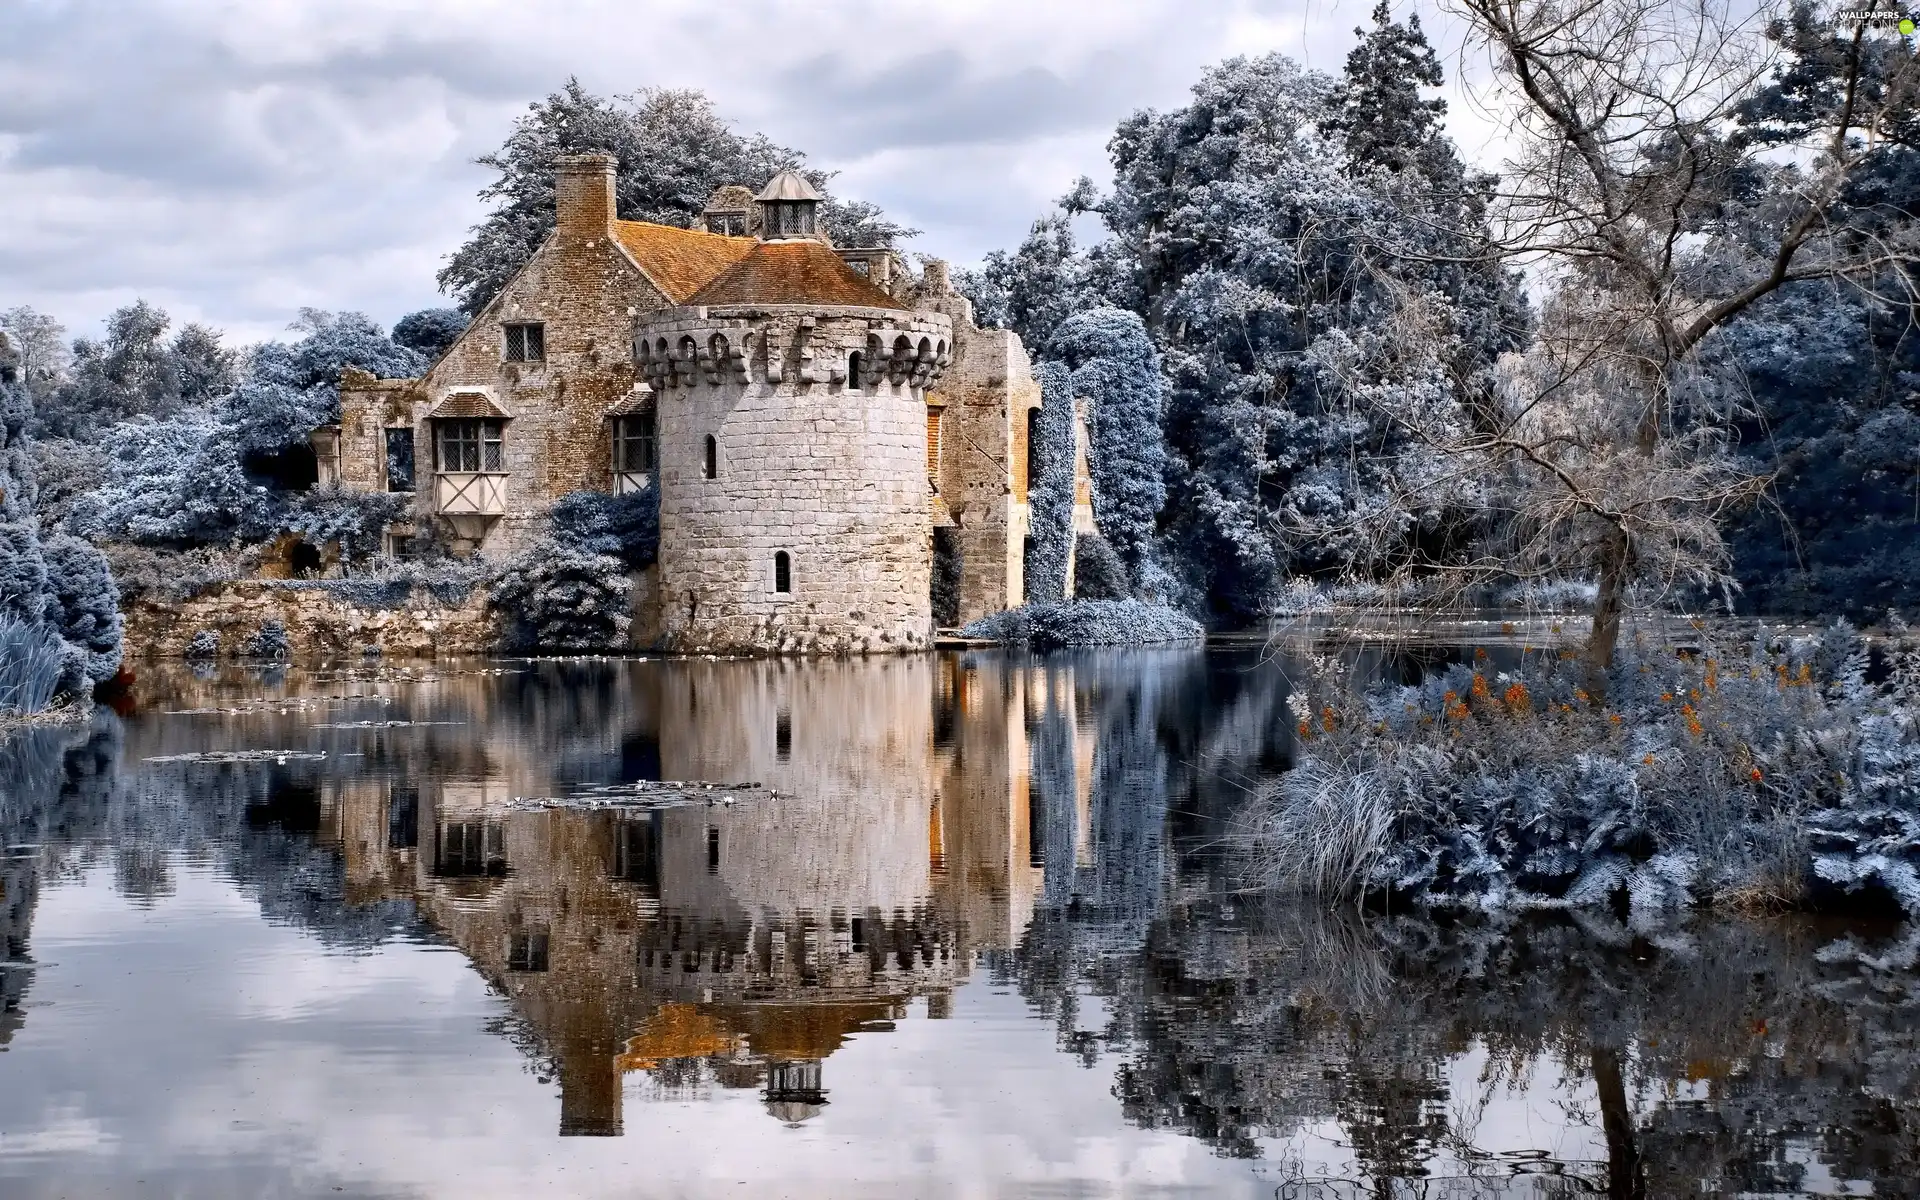 England, Scotney Castle, winter, Kent County, Scotney Manor, Pond - car, White frost